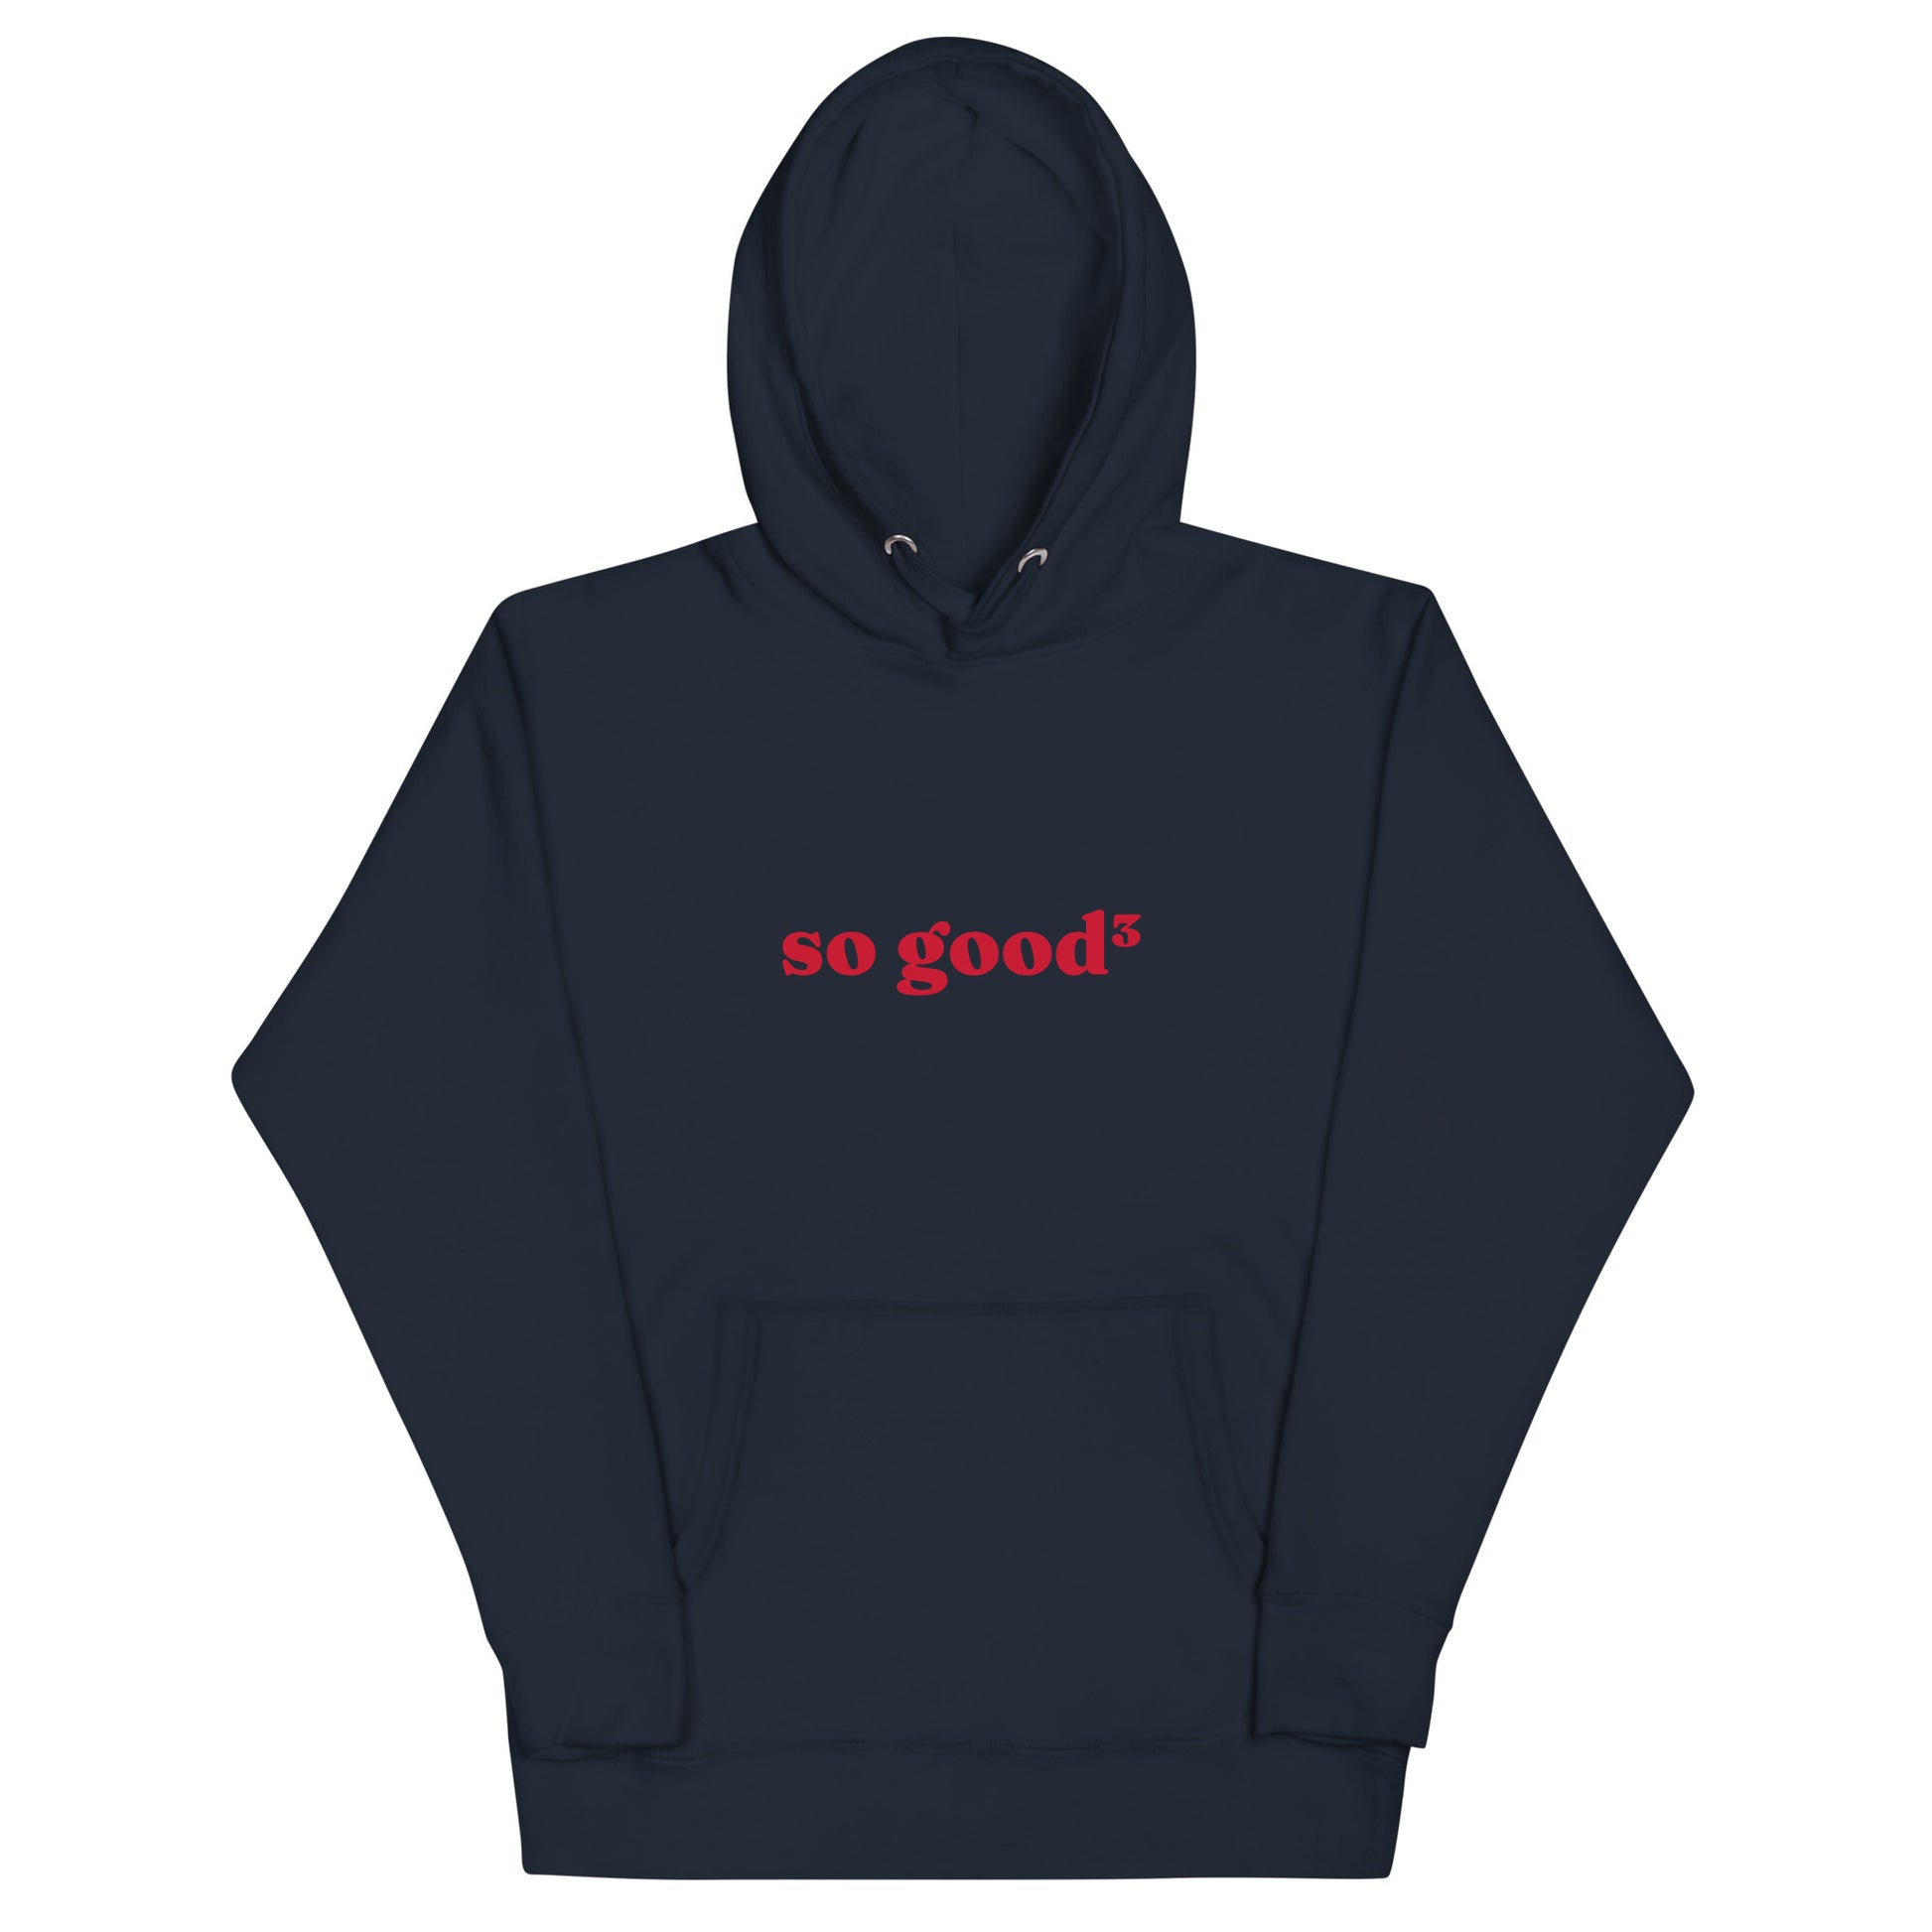 navy blue hoodie that says "so good cubed" in red lettering